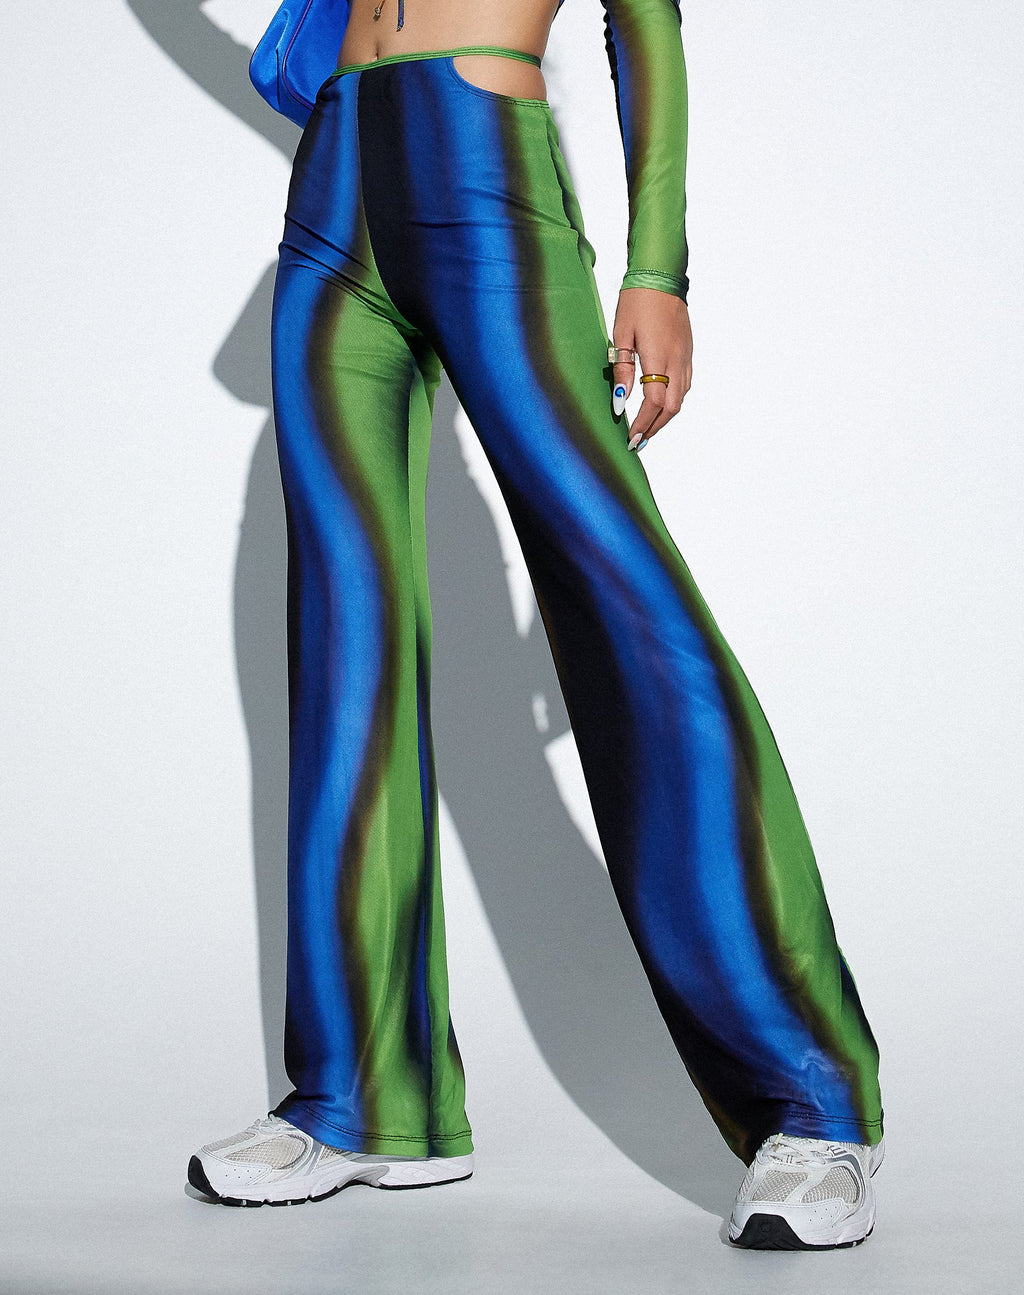 MOTEL X OLIVIA NEILL Mares Flare Trouser in Solarized Green and Blue